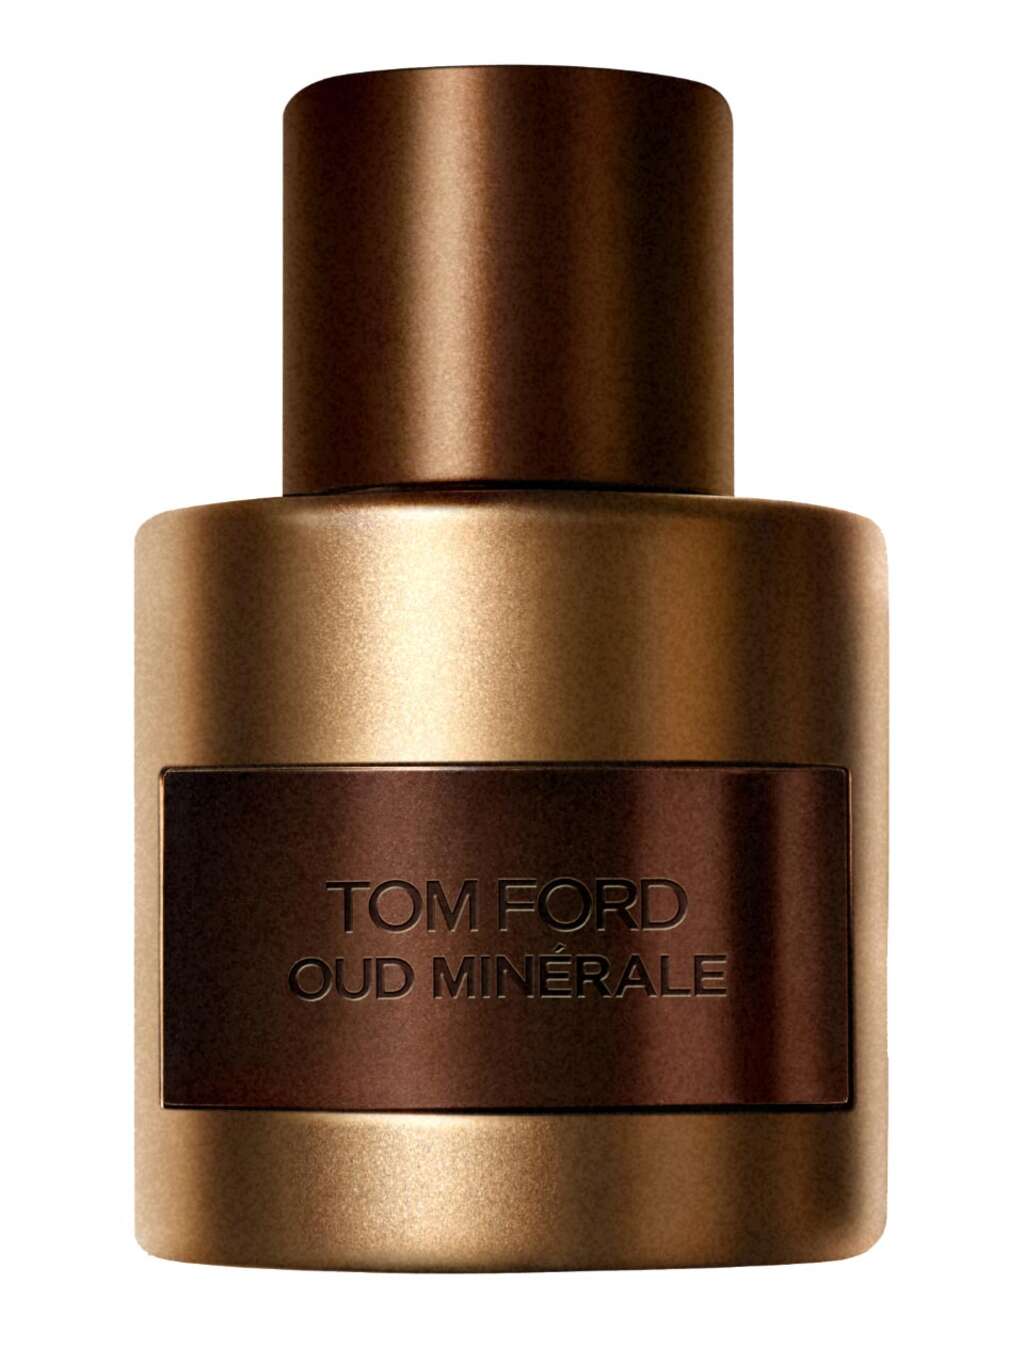 Tom Ford Signature Oud Minerale